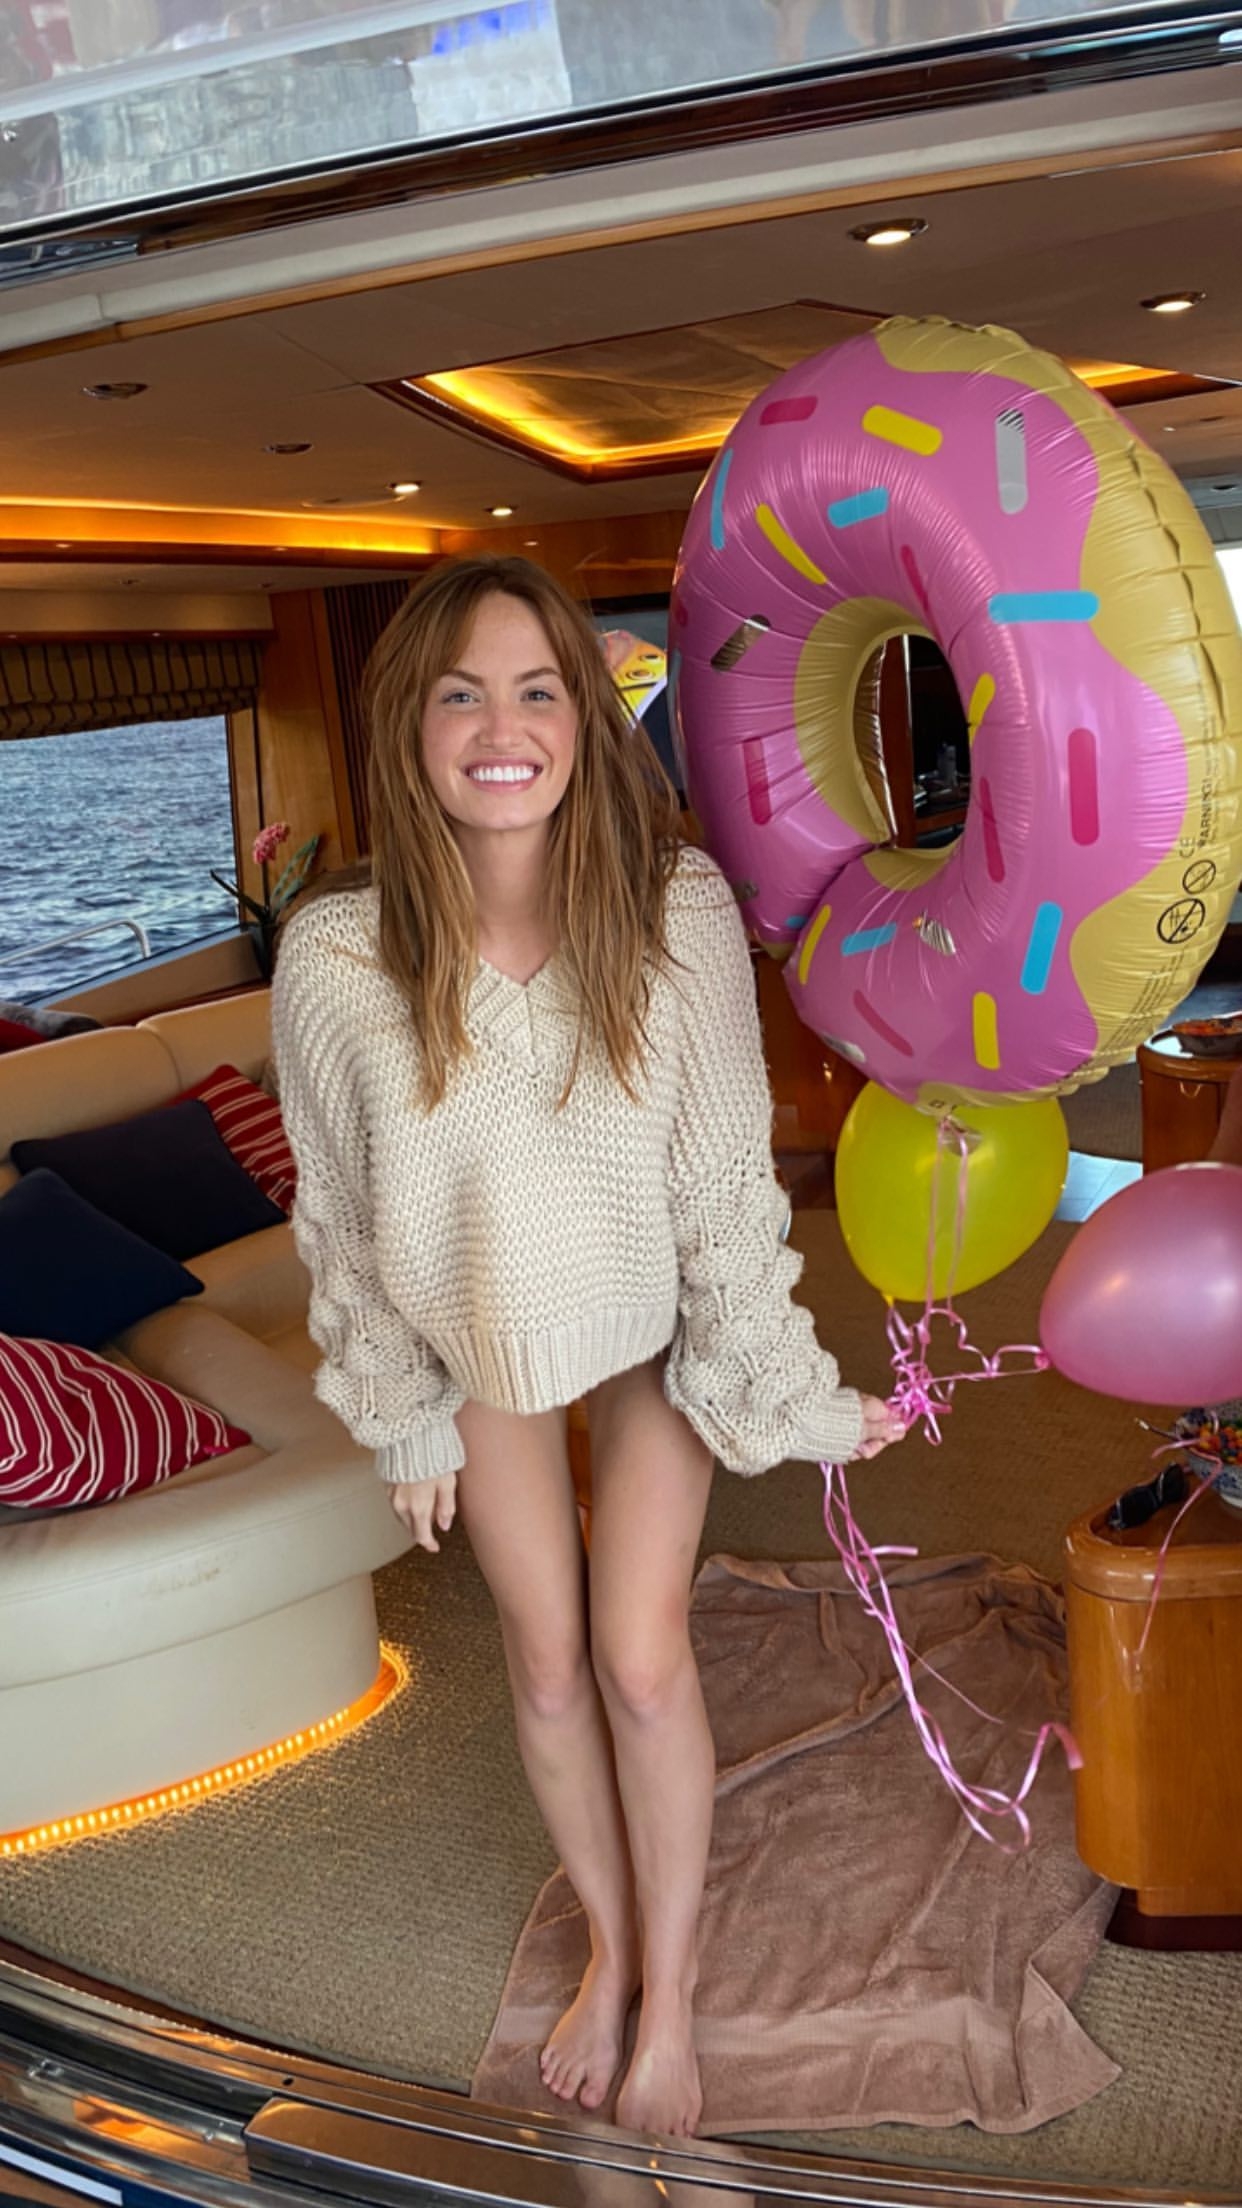 Photos n°8 : Haley Kalil Puts on a Boat Show!